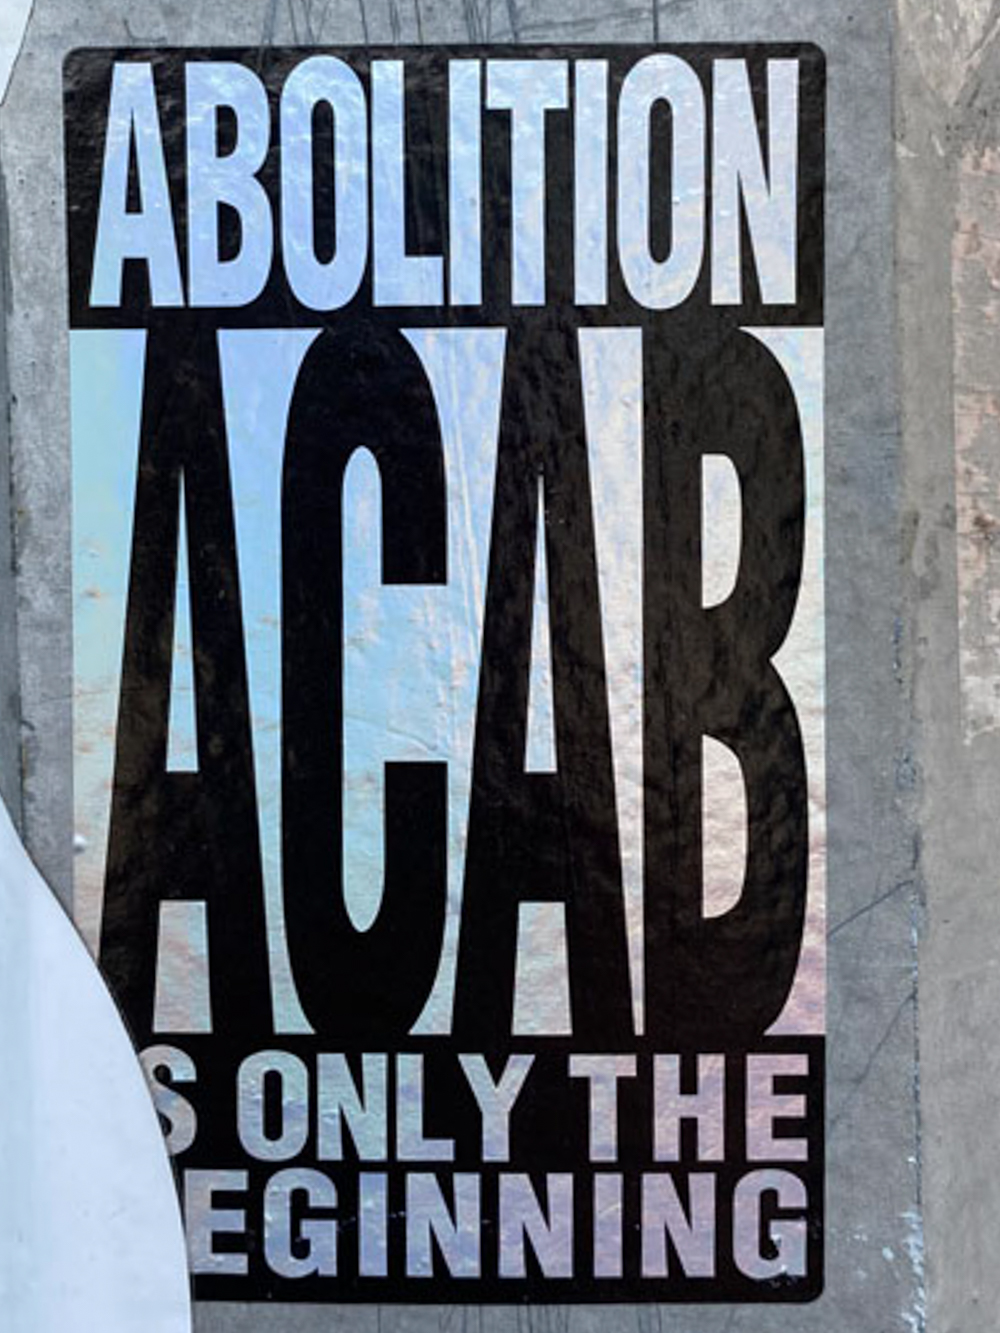 ABOLITION "ACAB" IS ONLY THE BEGINNING, is a sticker art and can found at 943-857 Bergen St, Brooklyn, NY.